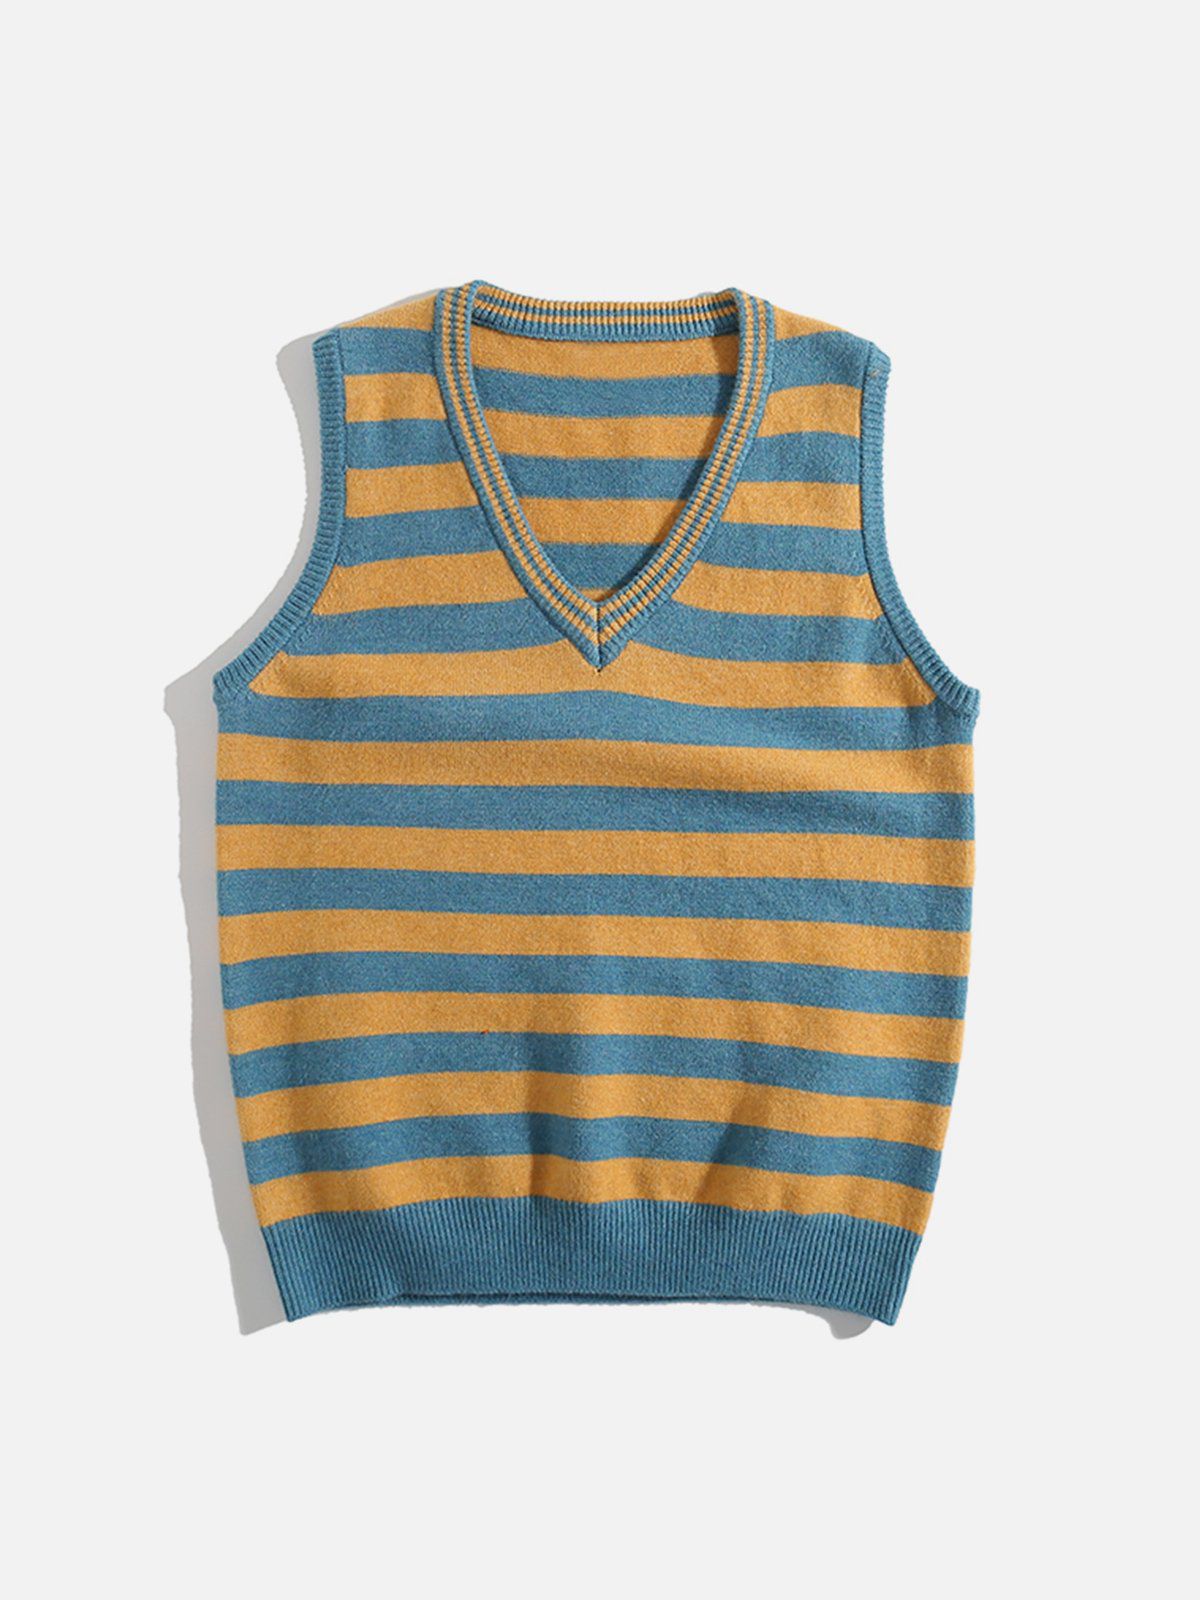 Majesda® - Striped Color Blocking Sweater Vest outfit ideas streetwear fashion